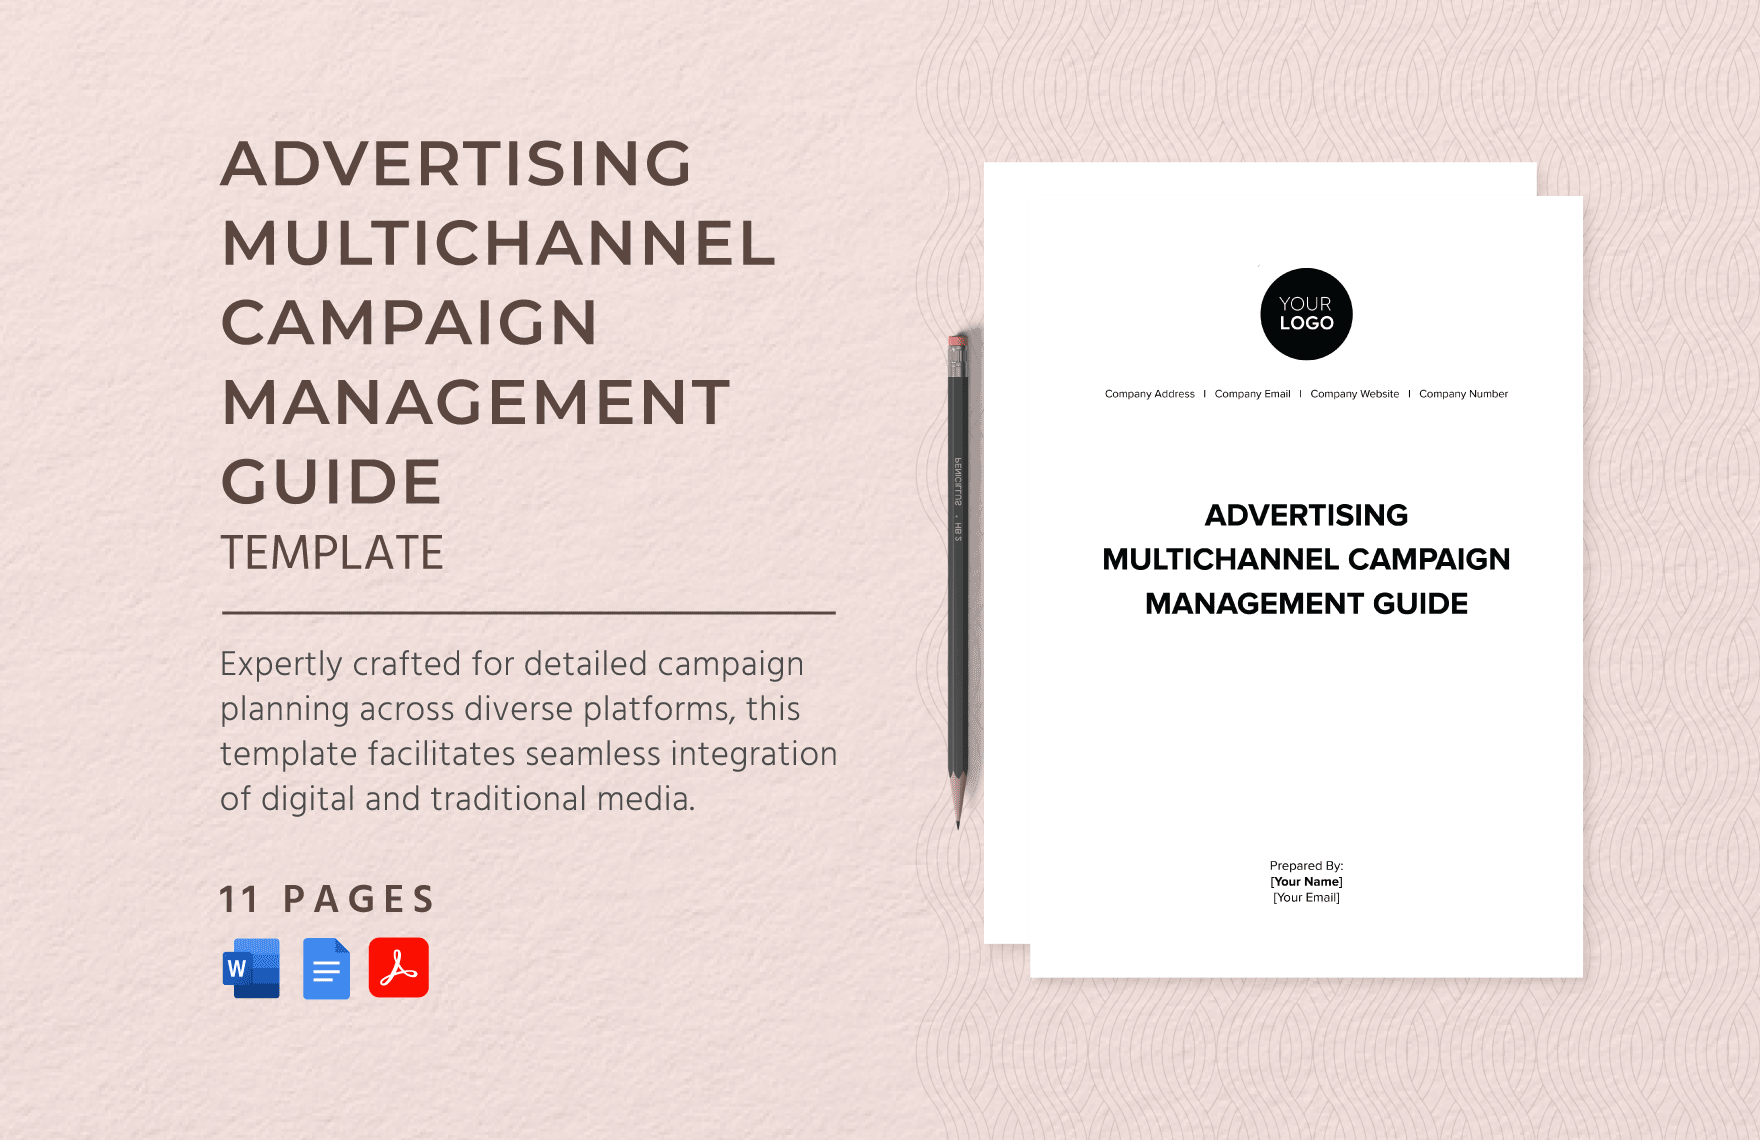 Advertising Multichannel Campaign Management Guide Template in Word, Google Docs, PDF